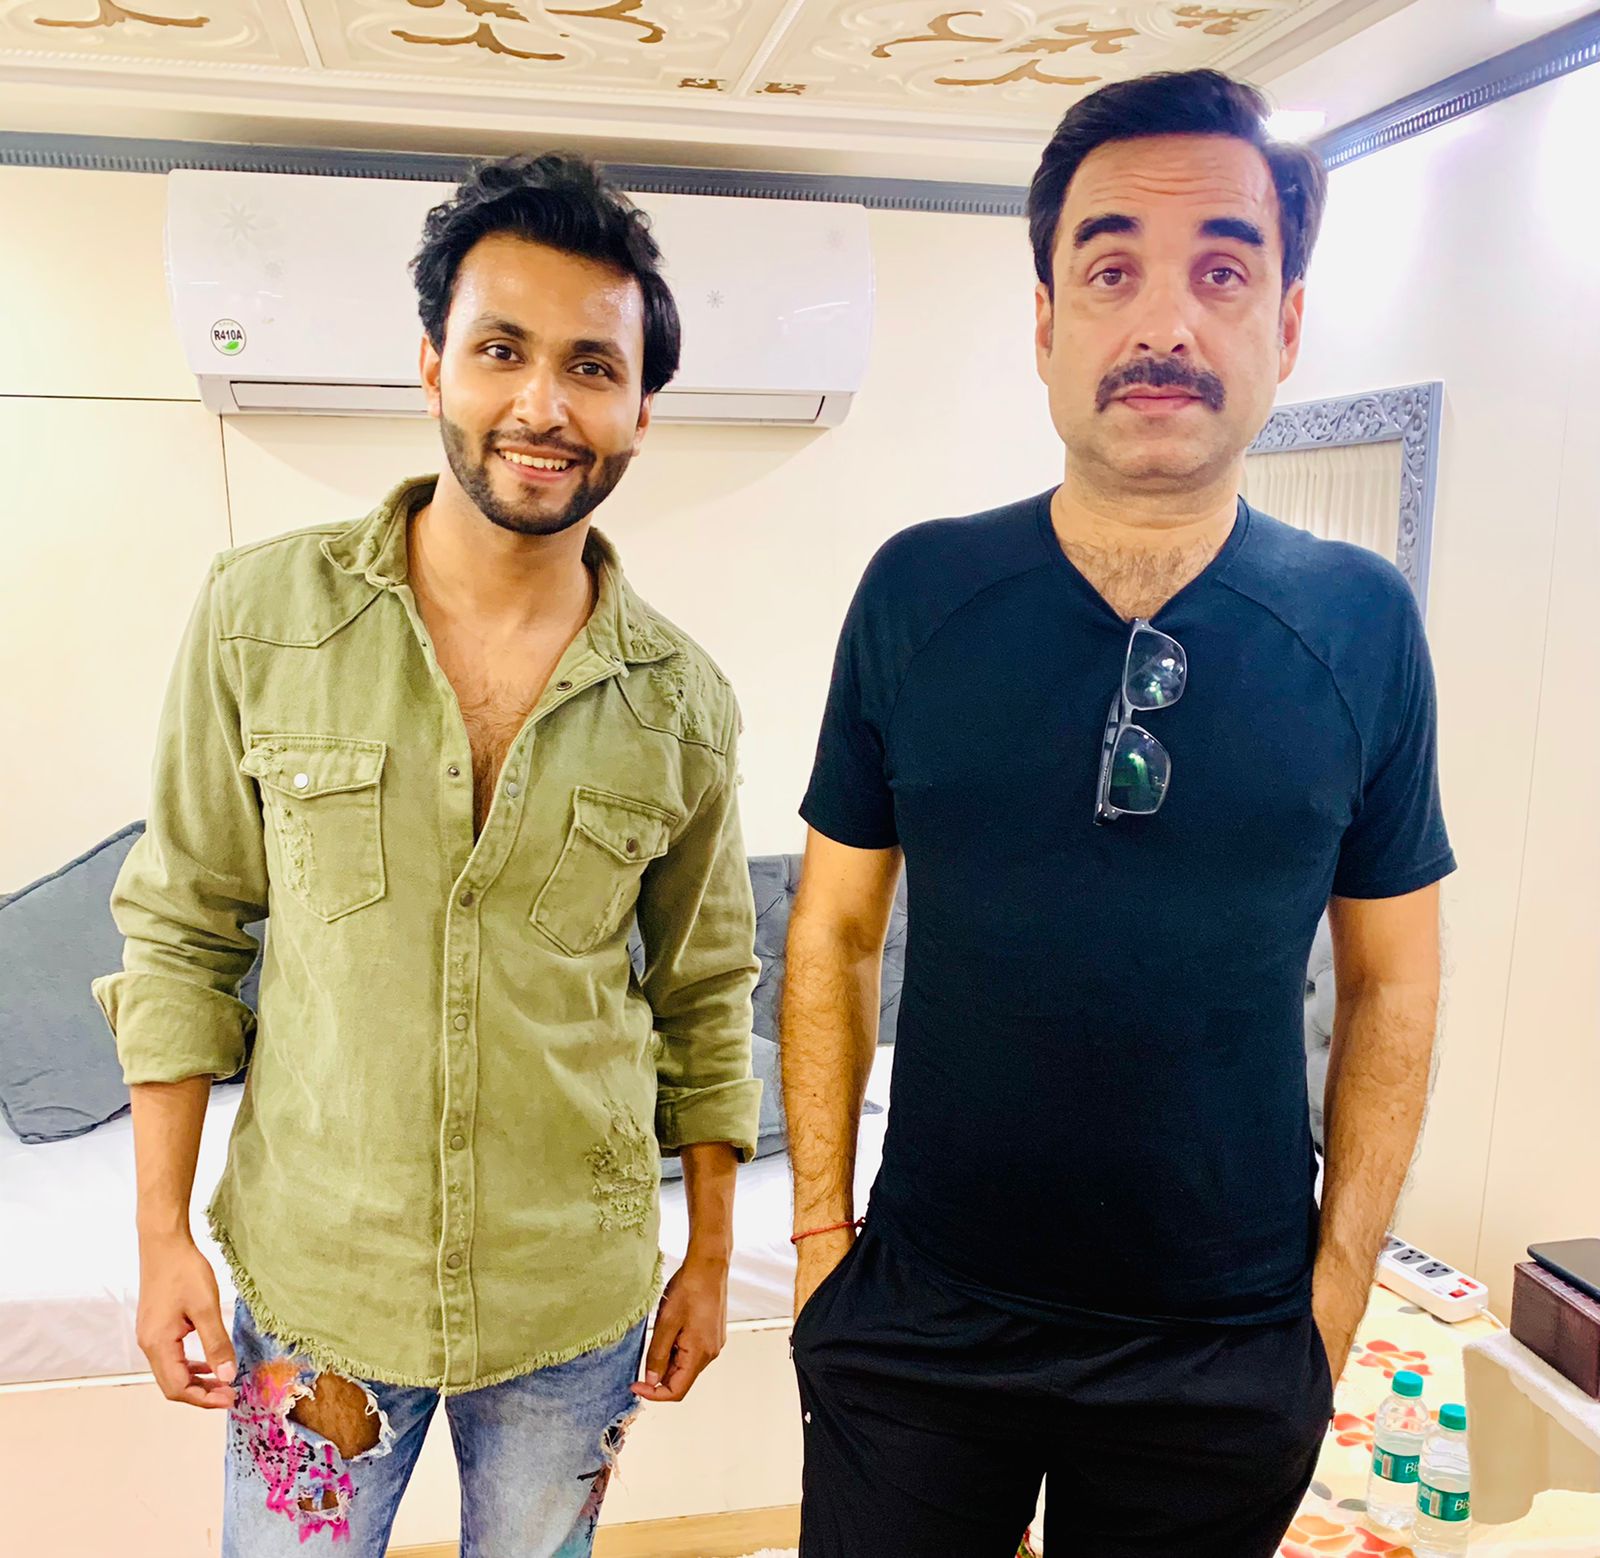 FILM INDUSTRY: Actor Monis Khan will be seen in a new film with actor Pankaj Tripathi